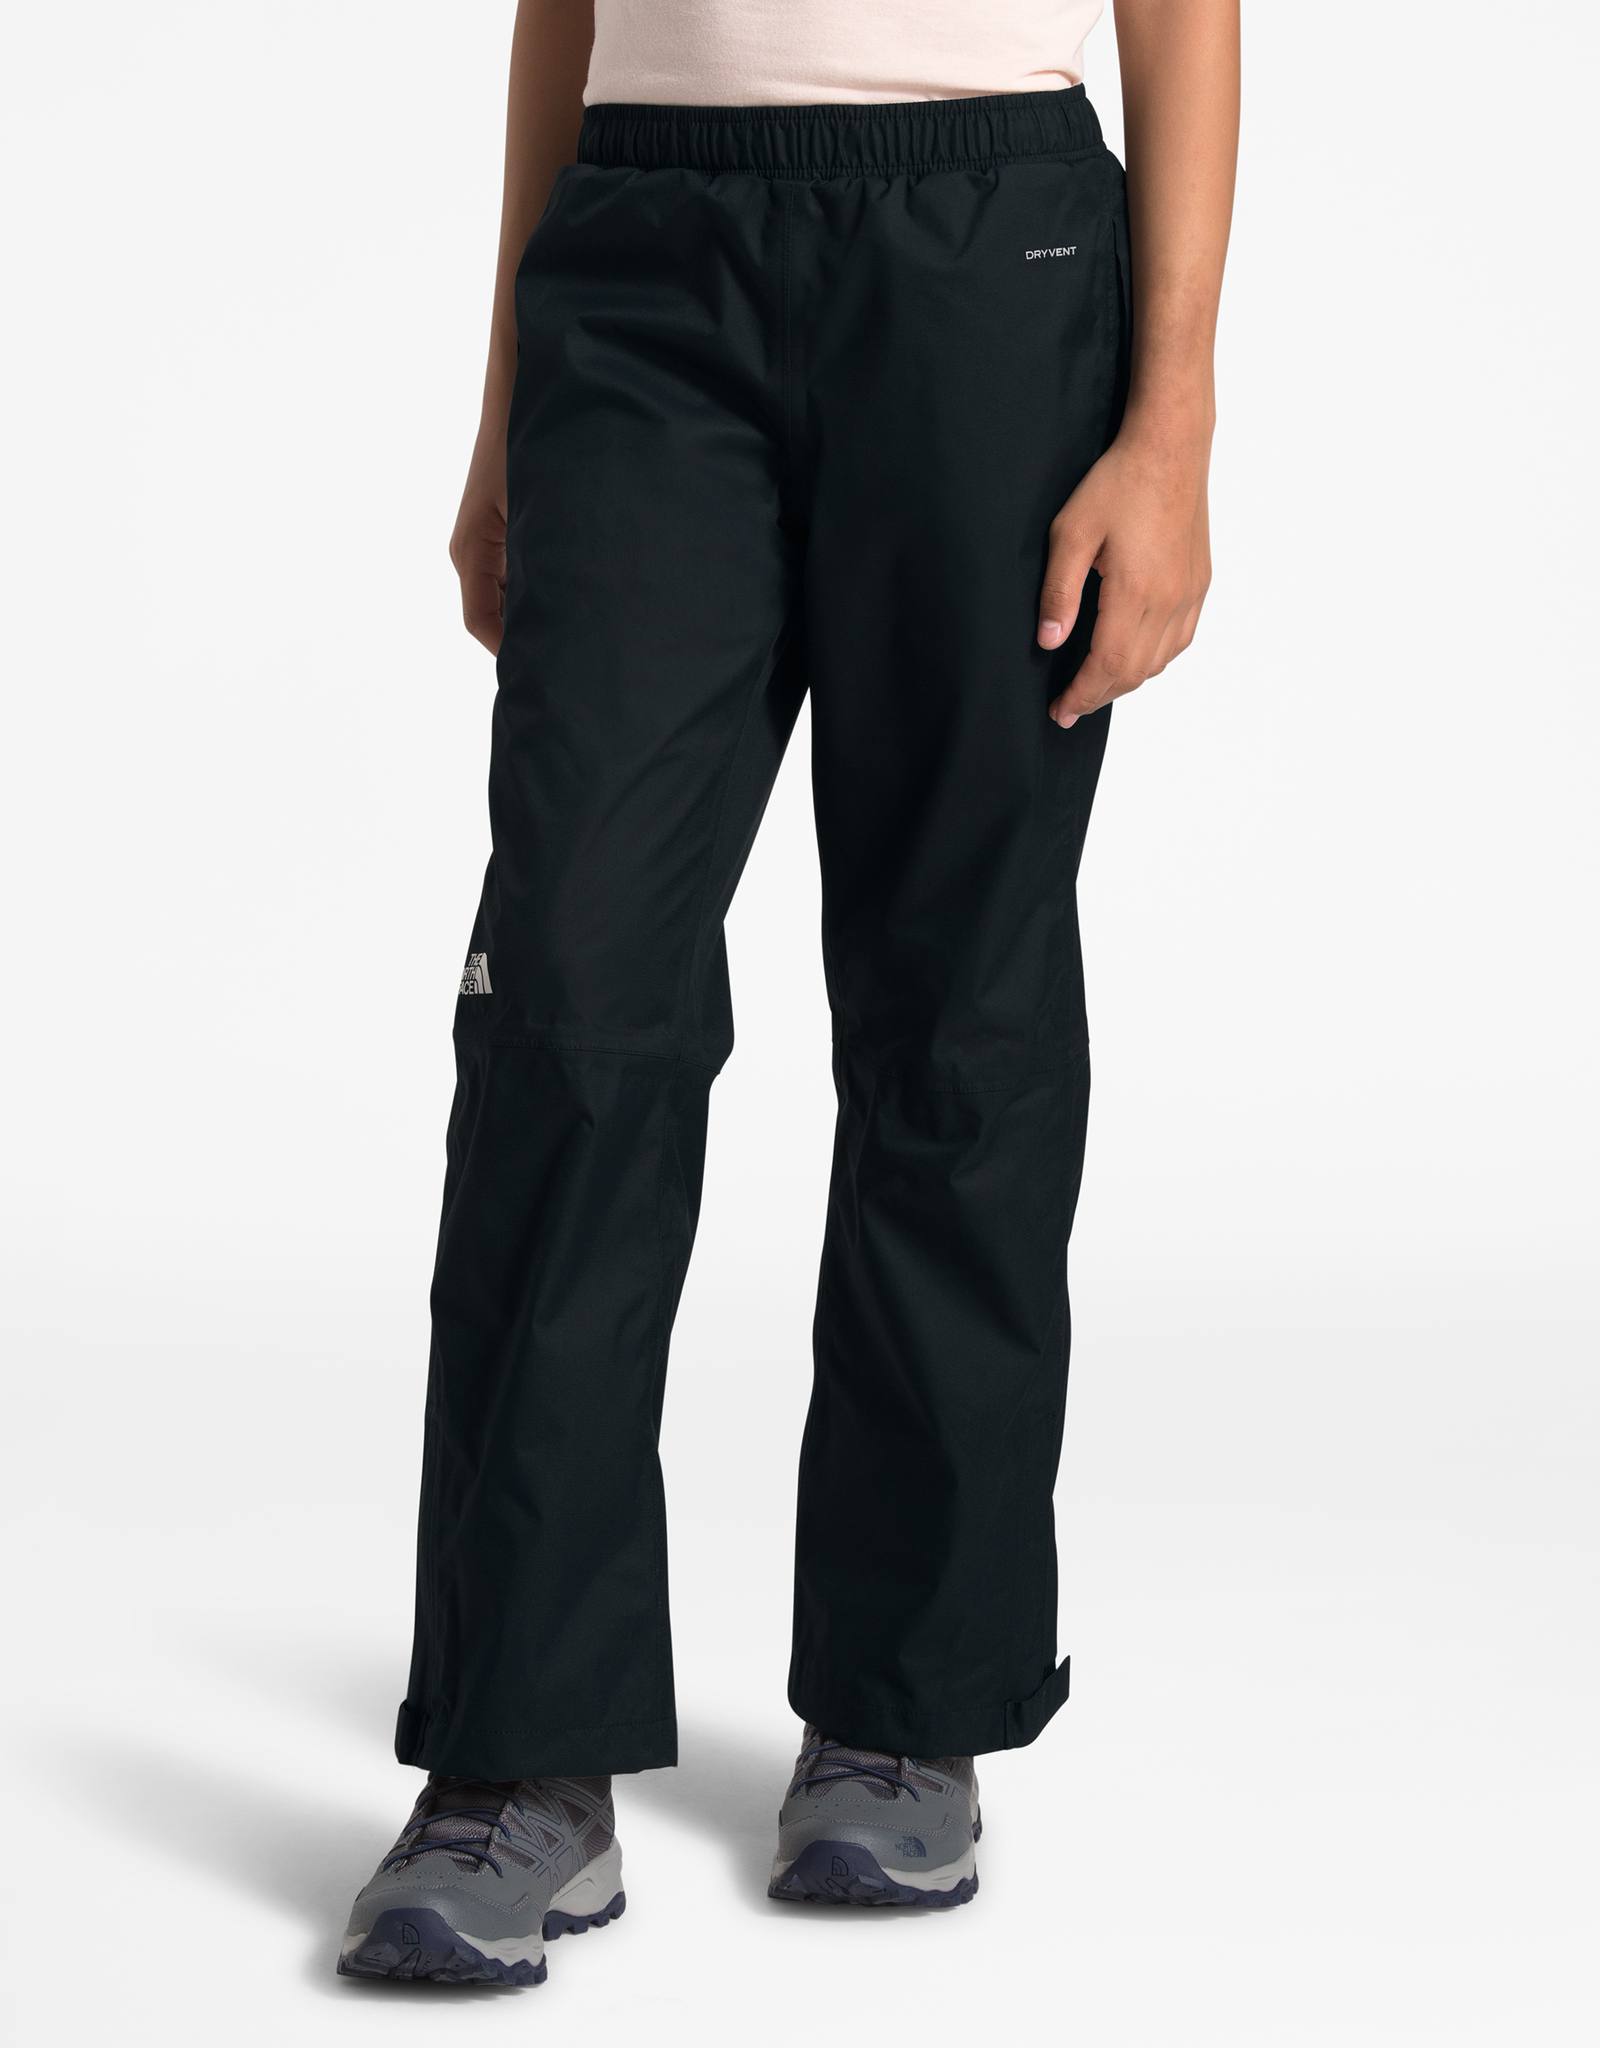 north face resolve pants review